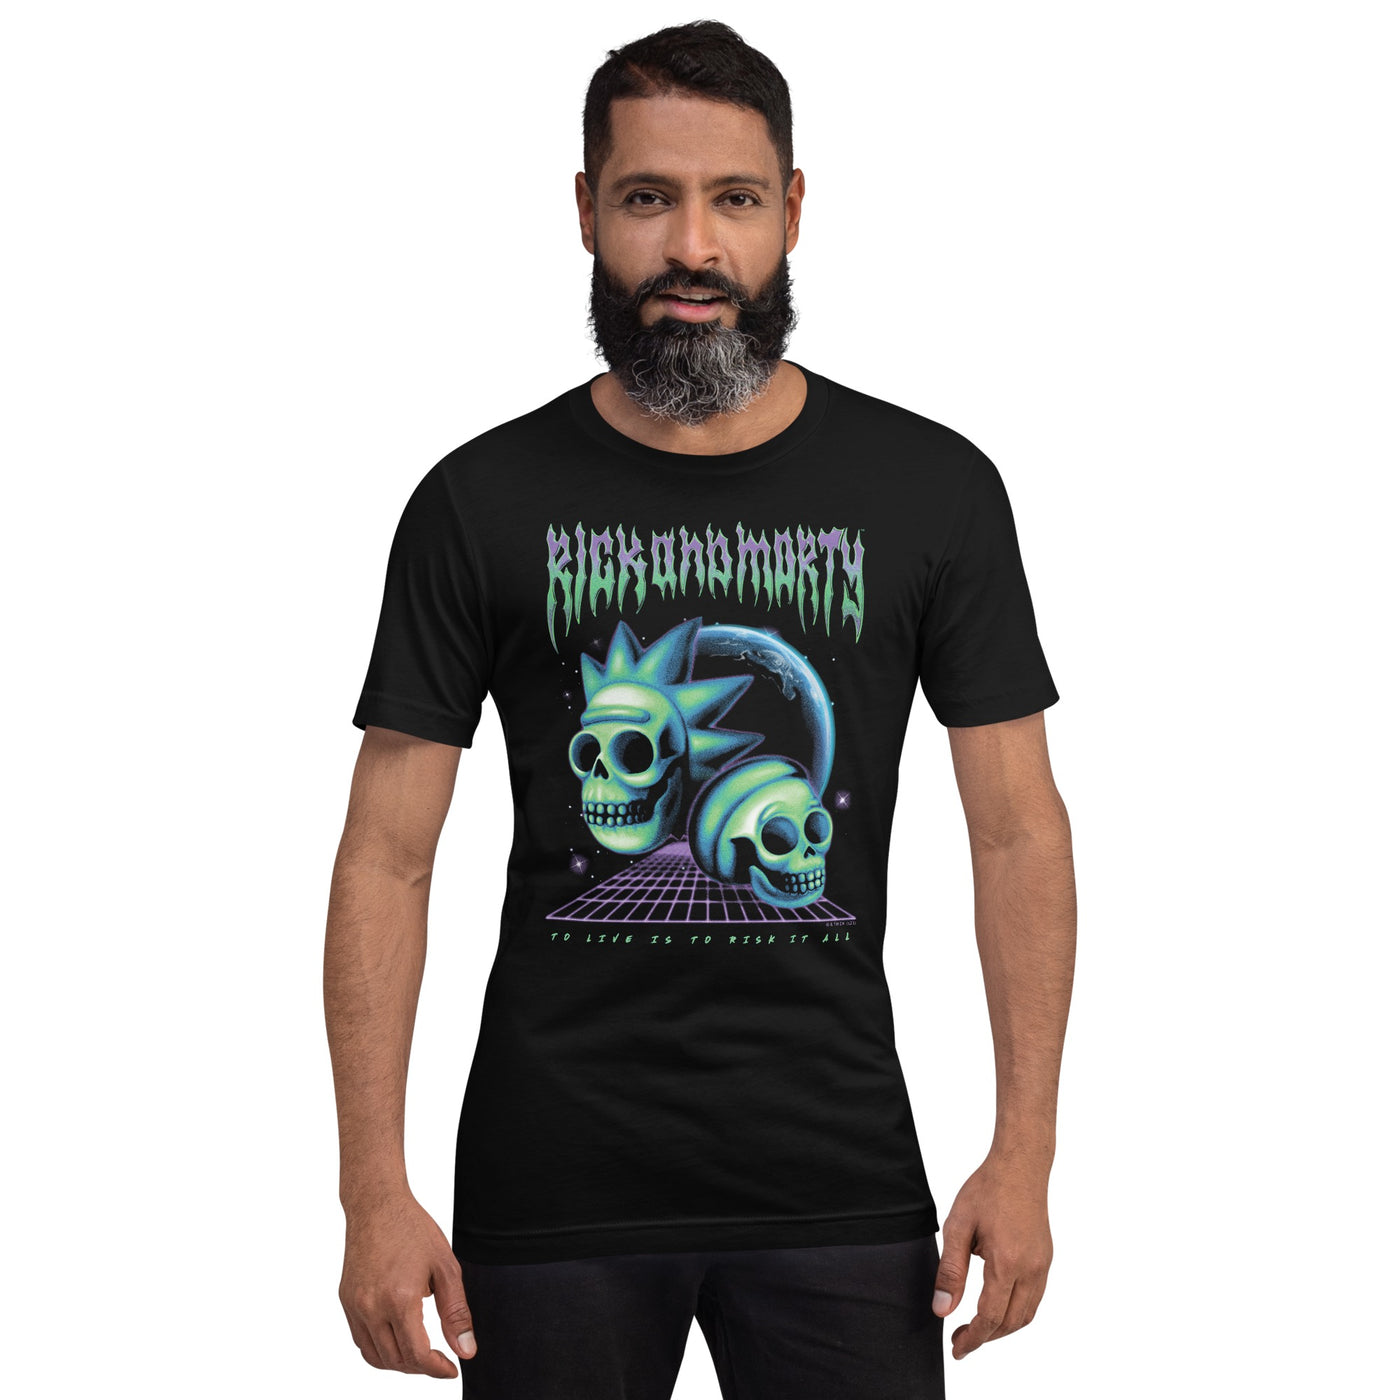 Rick and Morty To Live Is To Risk It All Adult T-Shirt